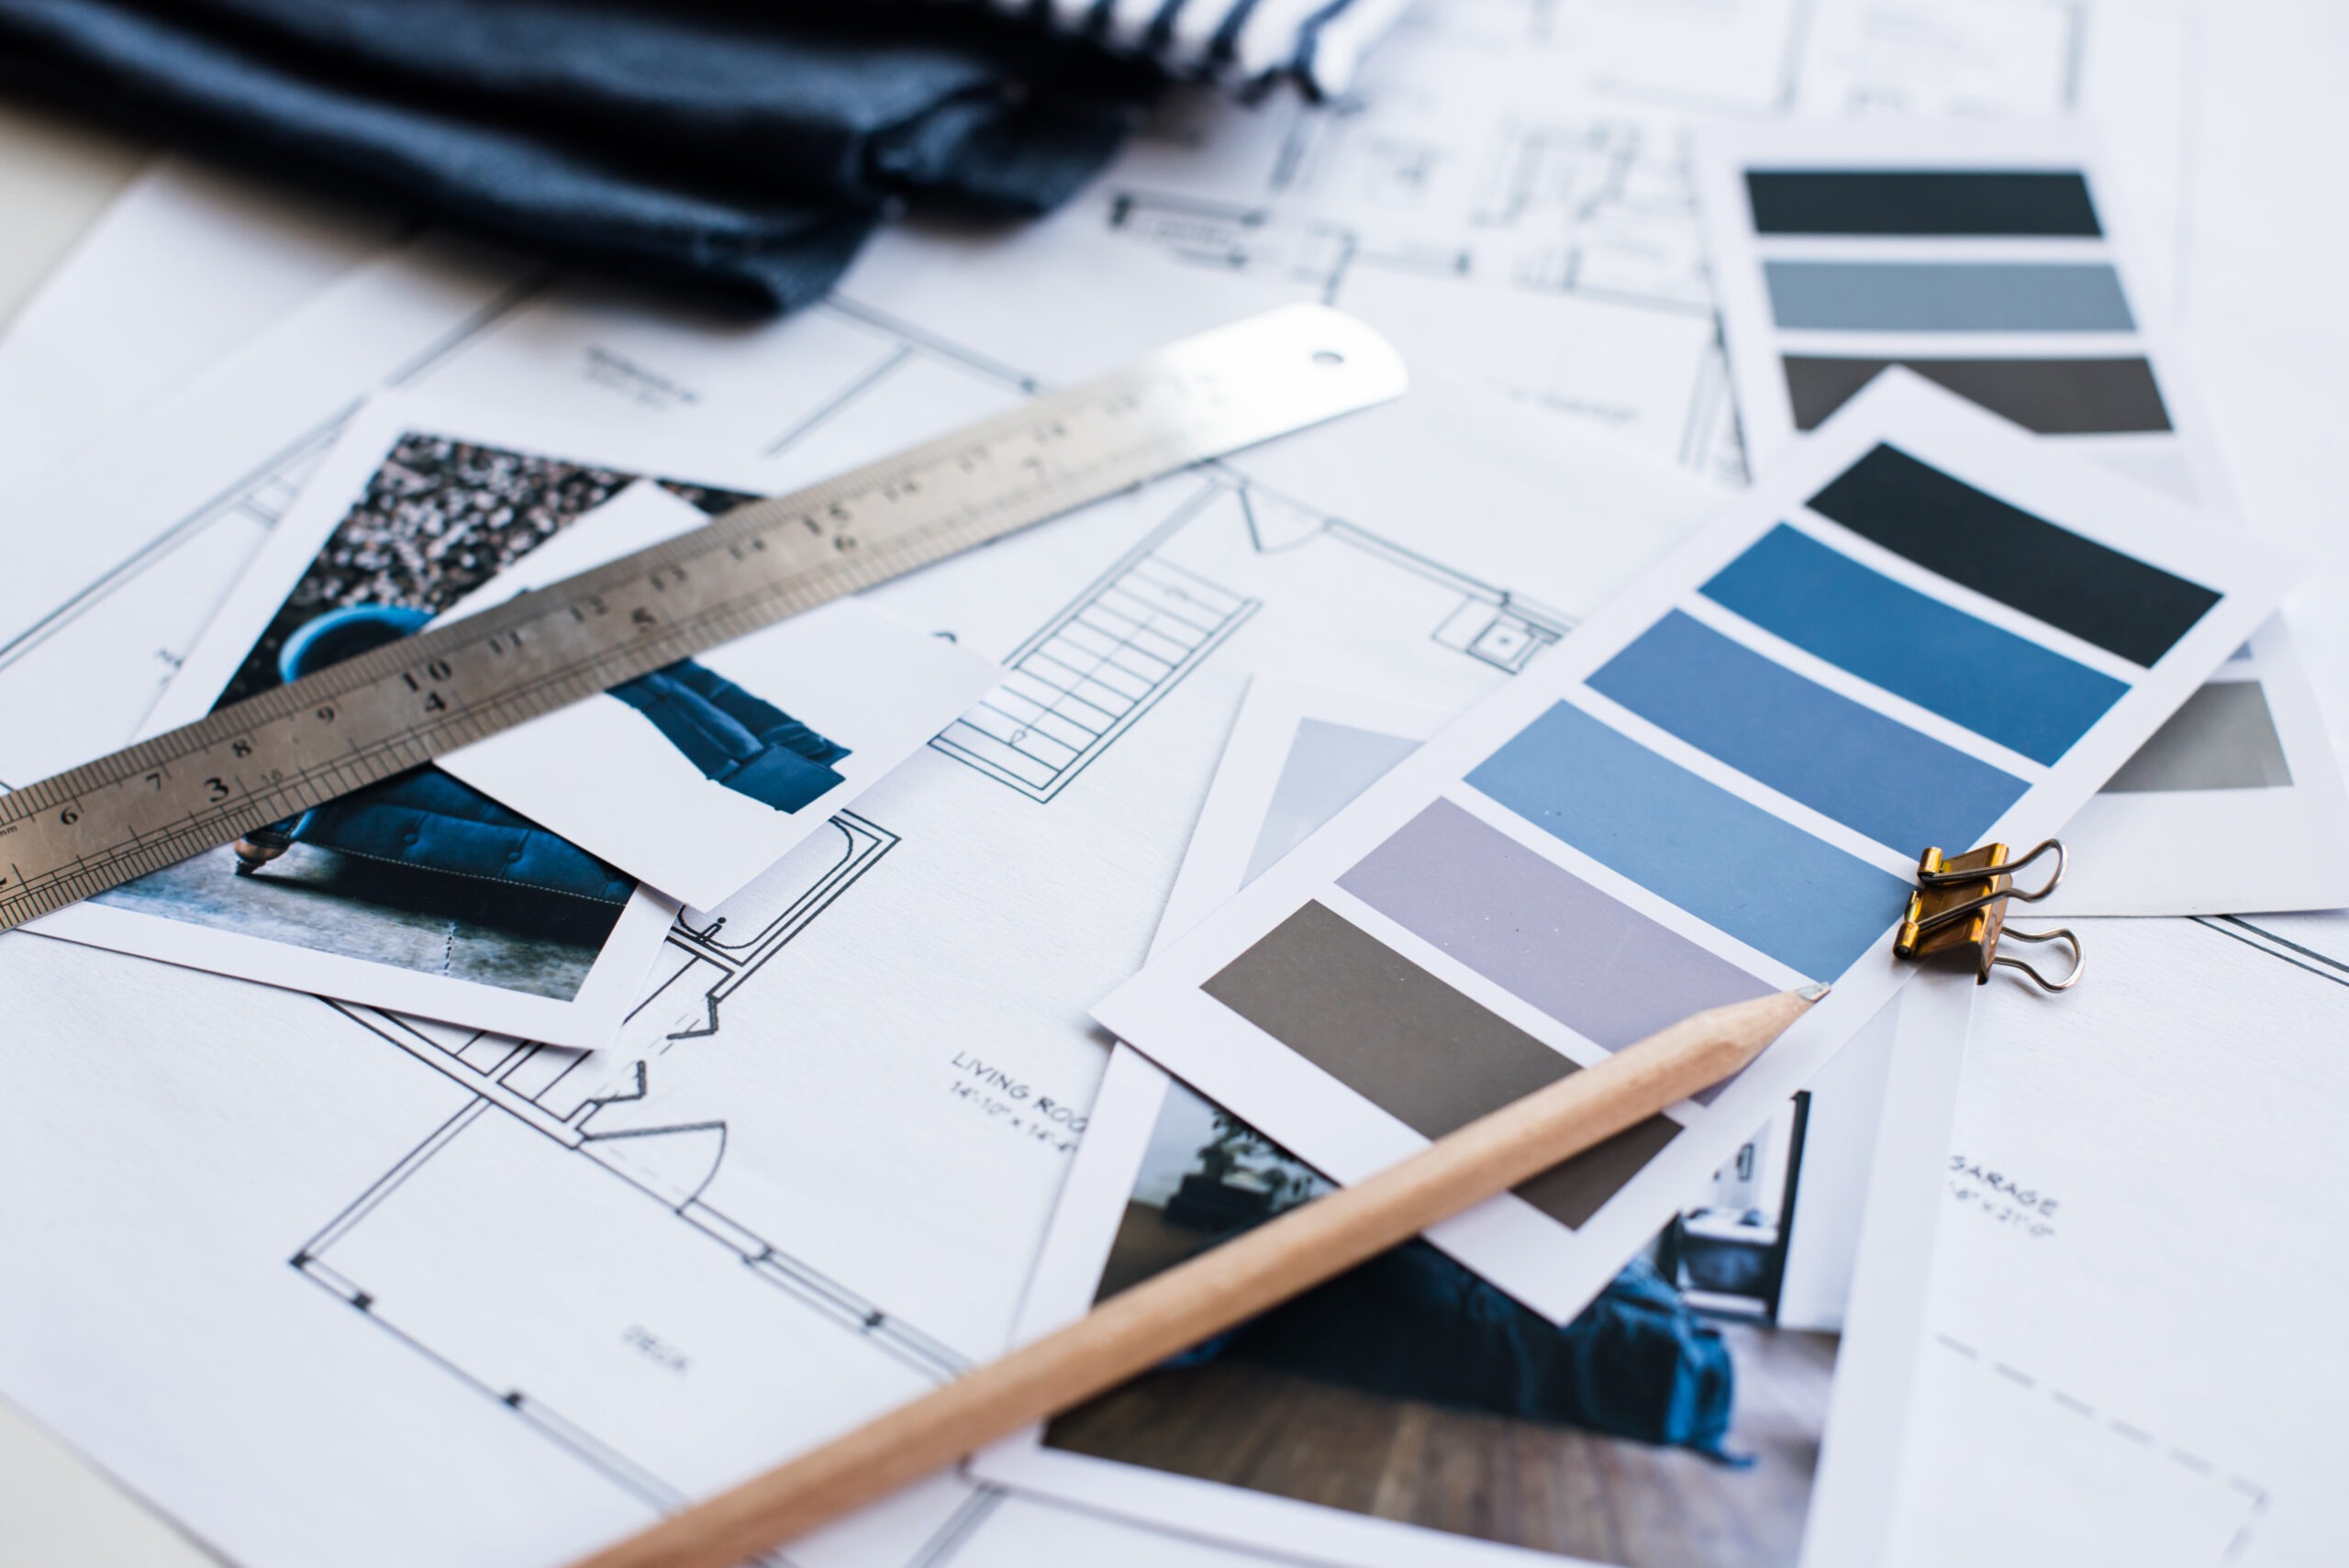 Interior designers working table, an architectural plan, a color palette, furniture and fabric samples in blue color. Drawings and plans.